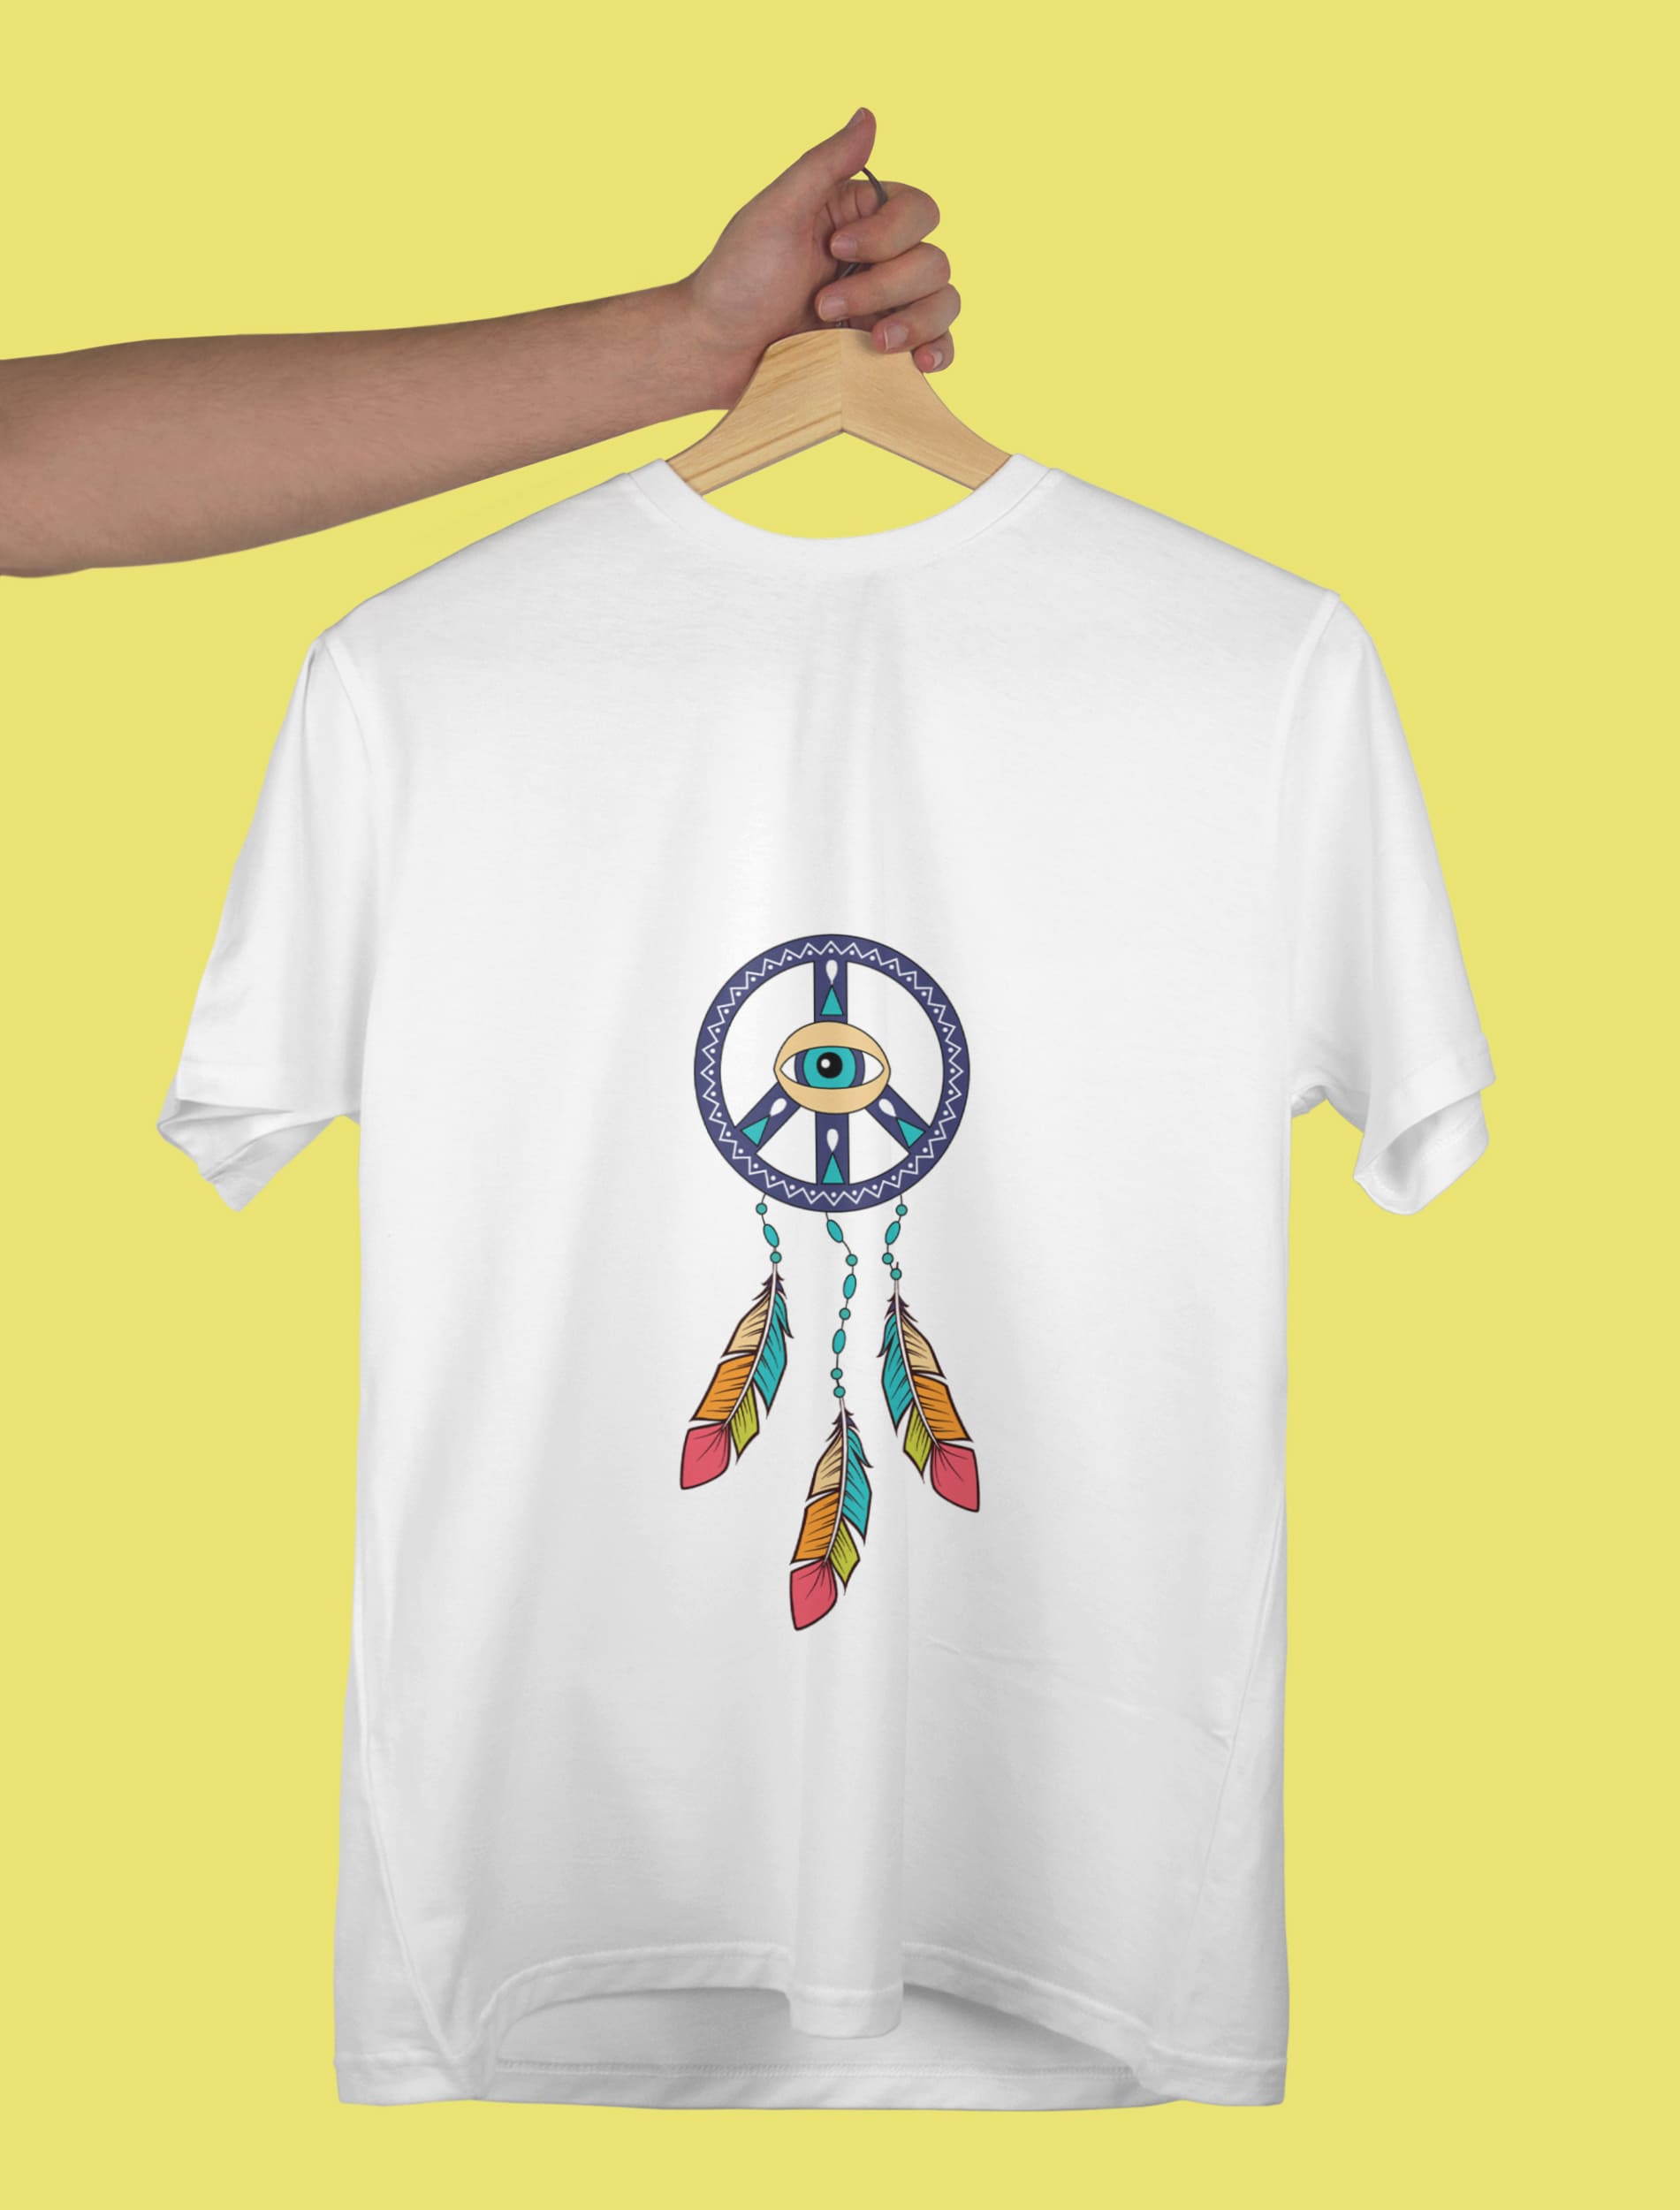 Hippie elements on the t-shirt preview.